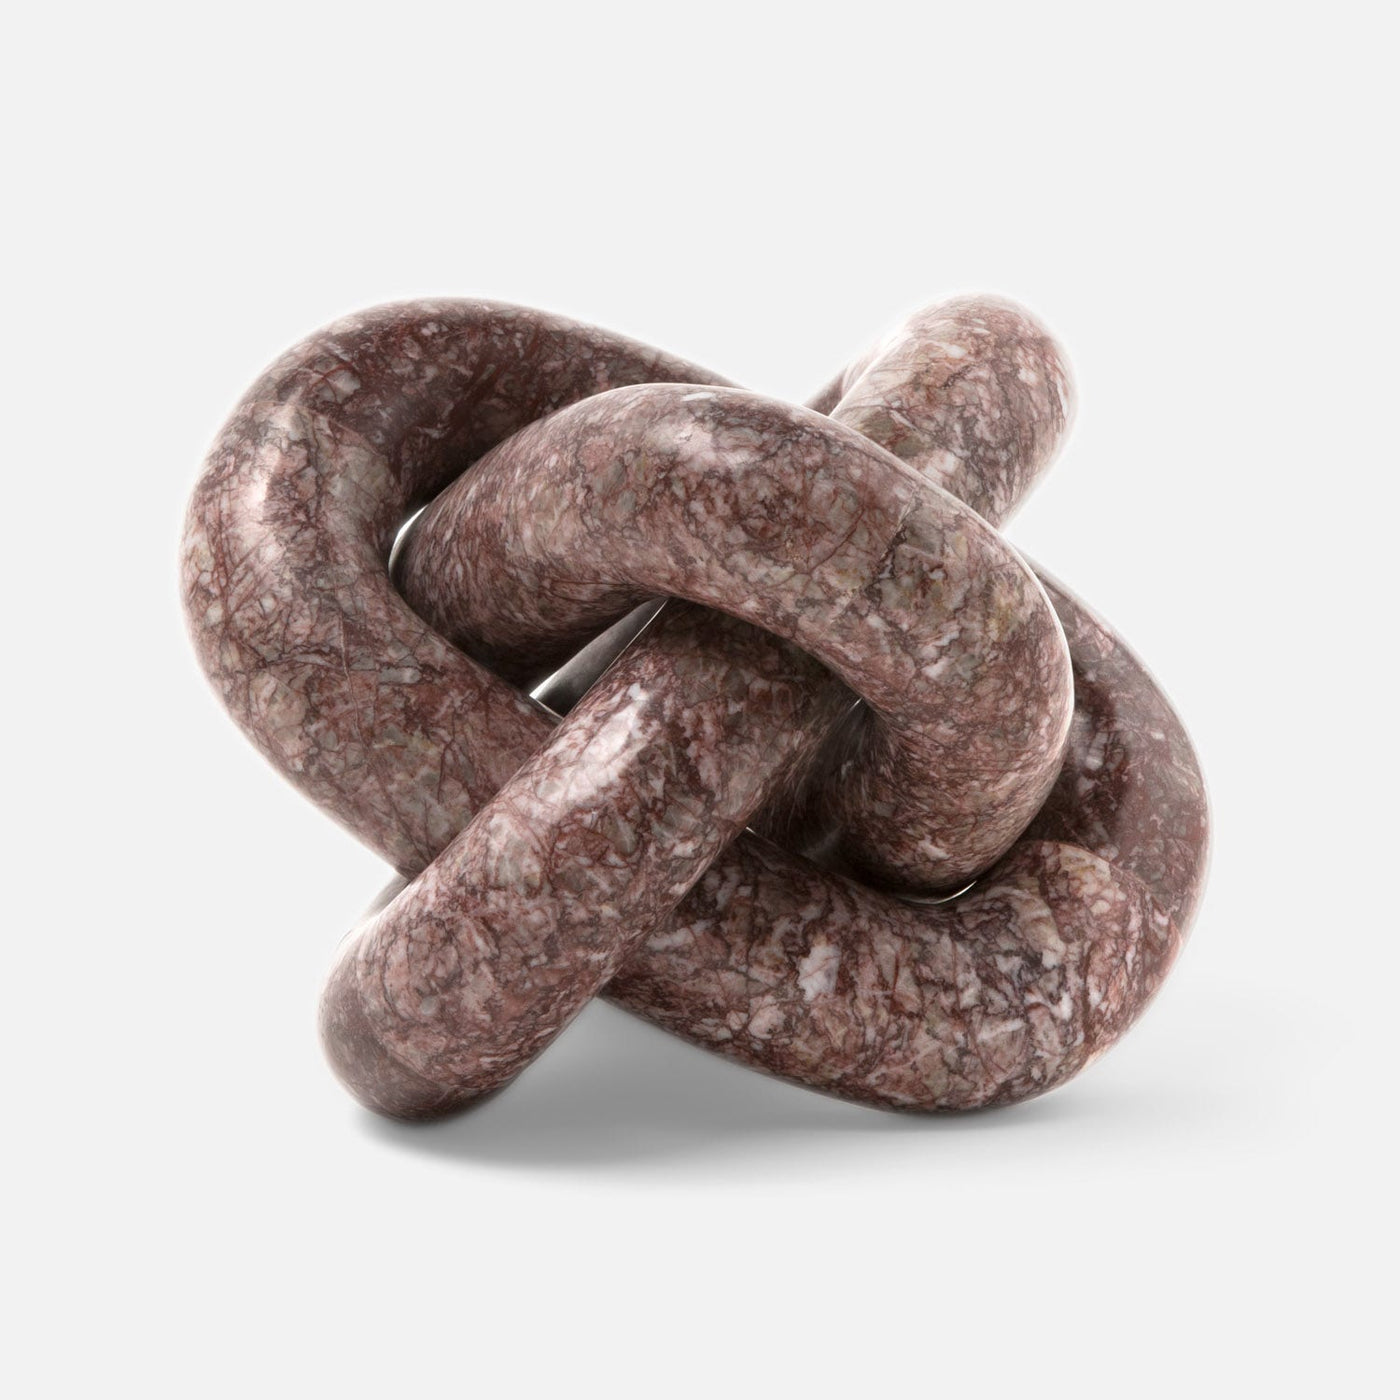 STONE OBJECT KNOT (Available in 4 Finishes)